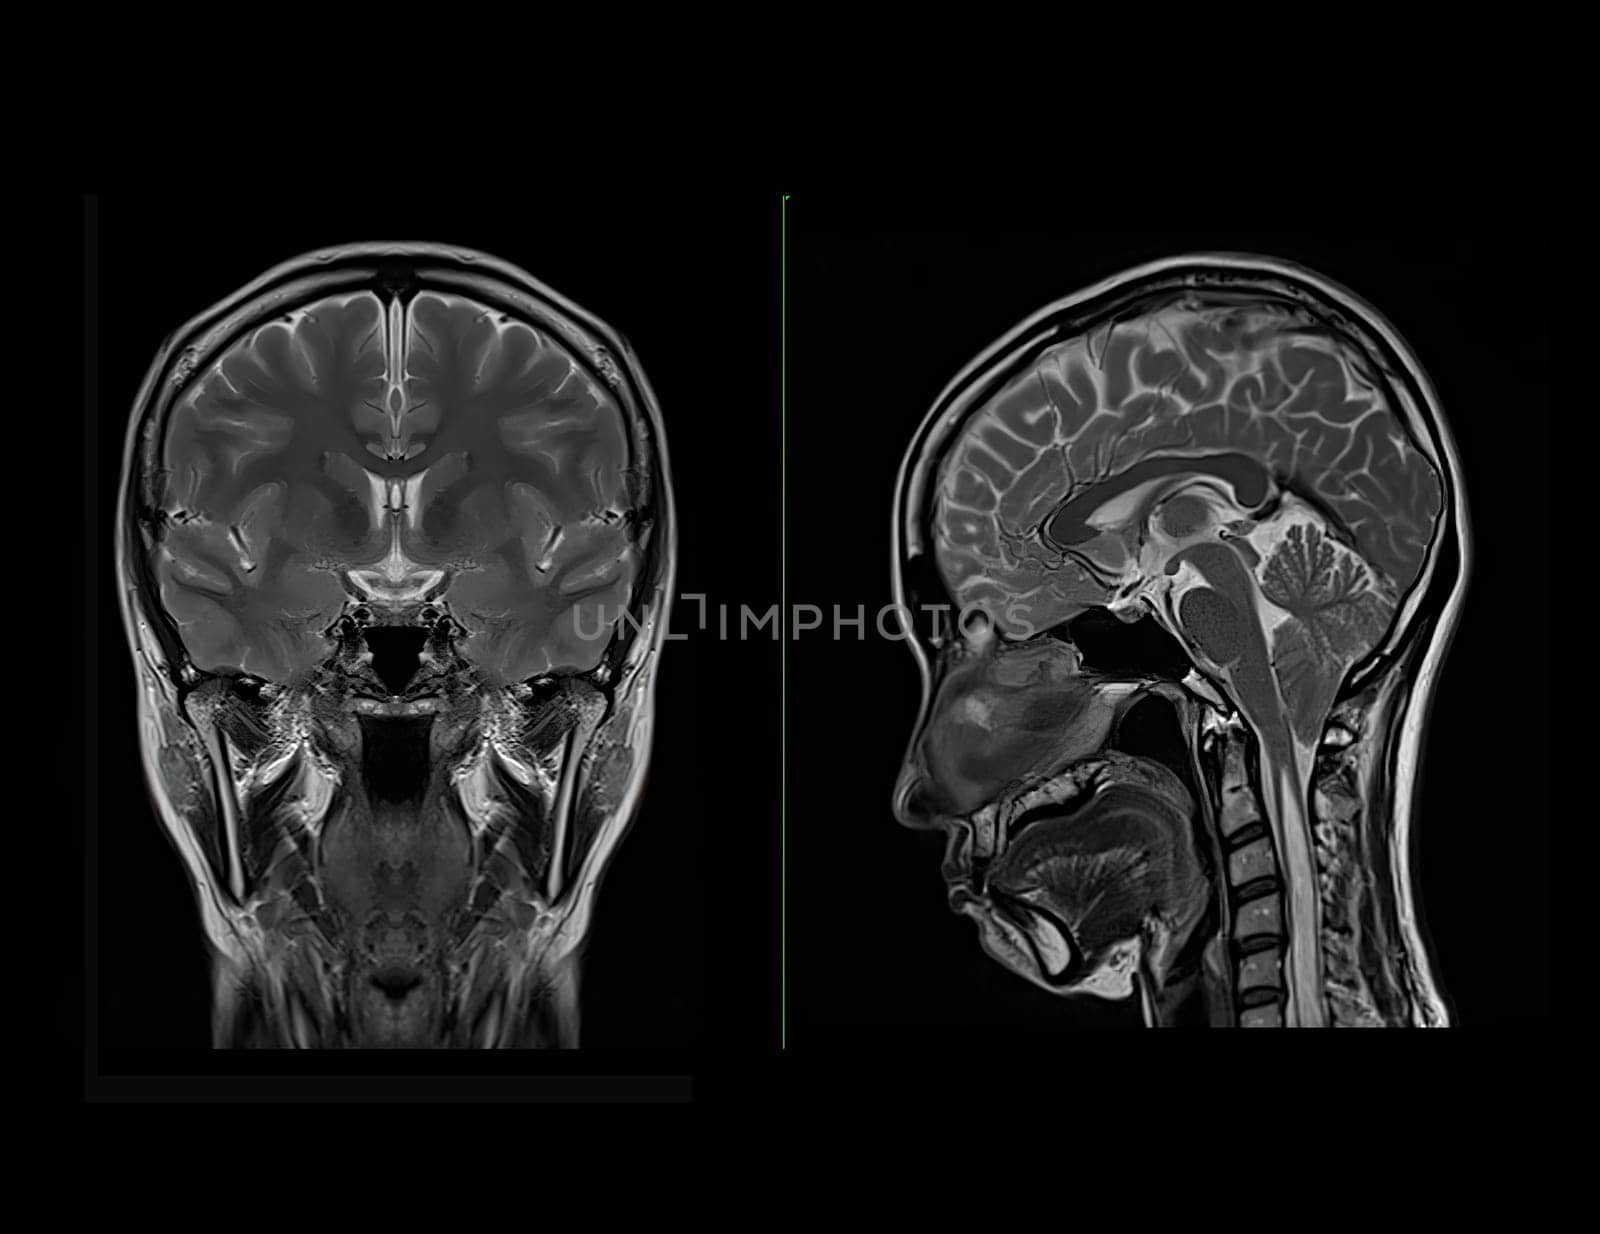 MRI  brain scan  Compare Coronal and sagittal plane for detect  Brain  diseases sush as stroke disease, Brain tumors and Infections. by samunella